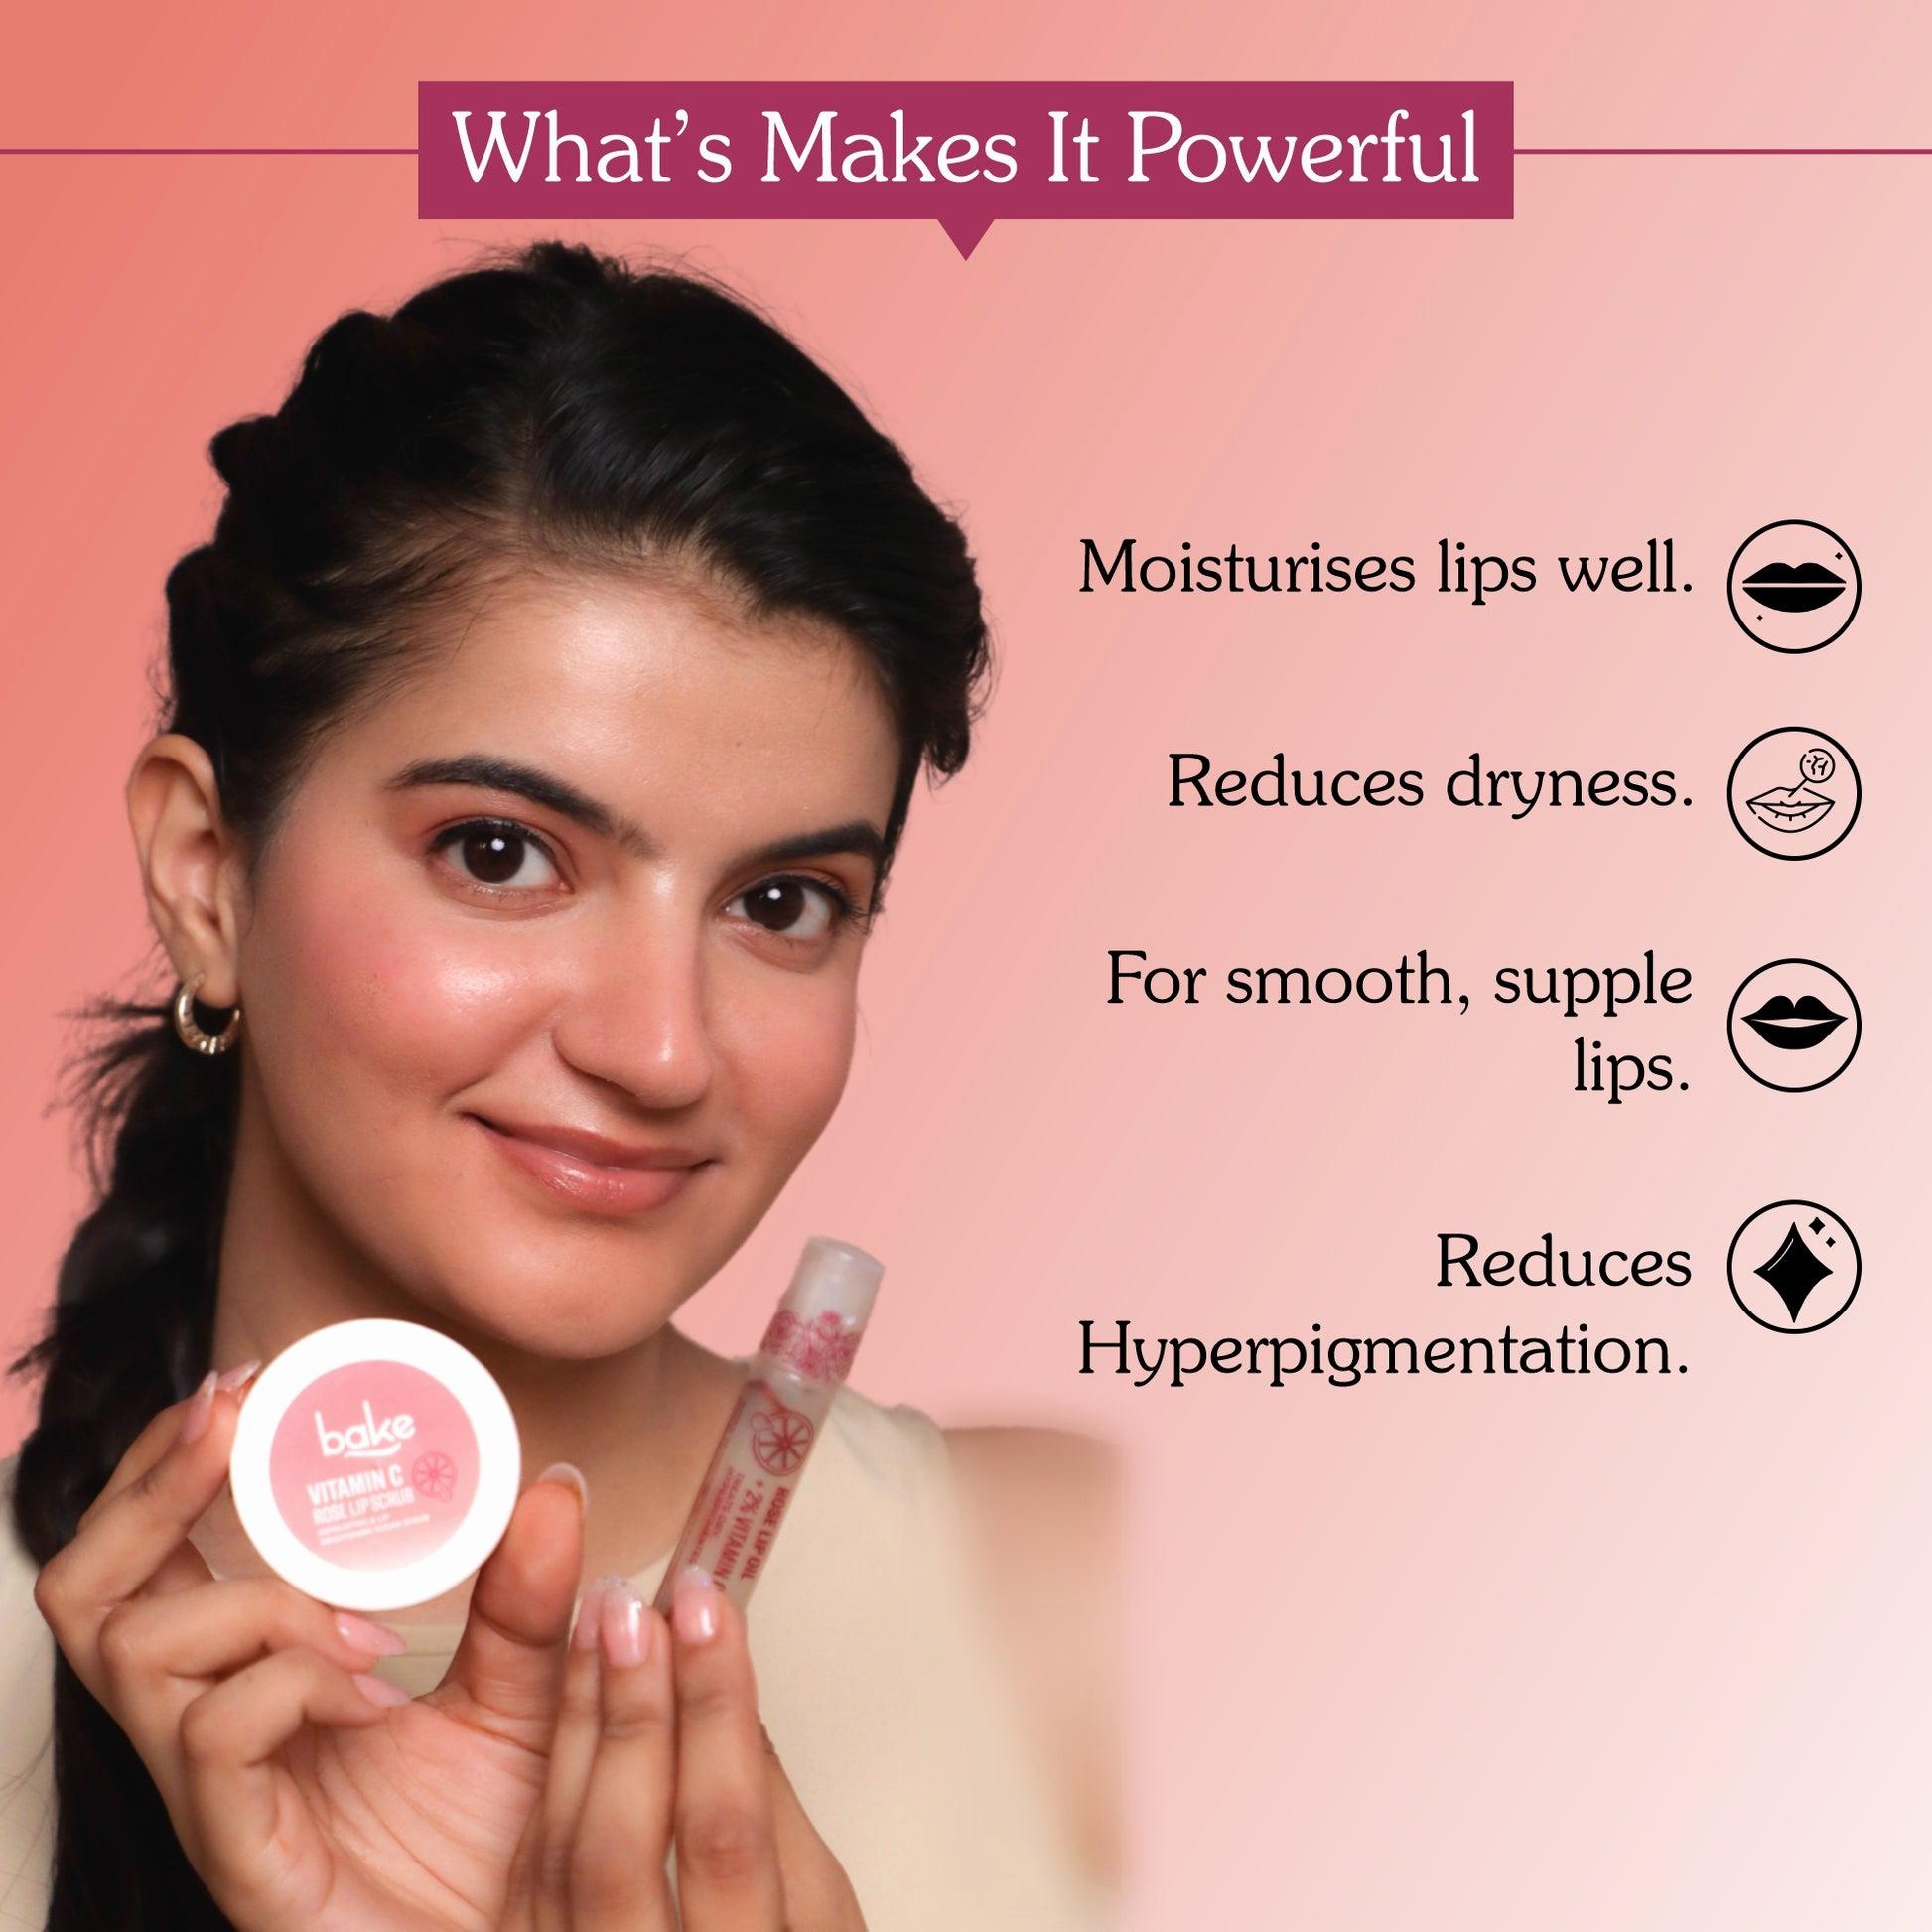 A young woman with dark hair and light makeup holds a small pink jar of lip scrub and four icons show the benefits of using it.